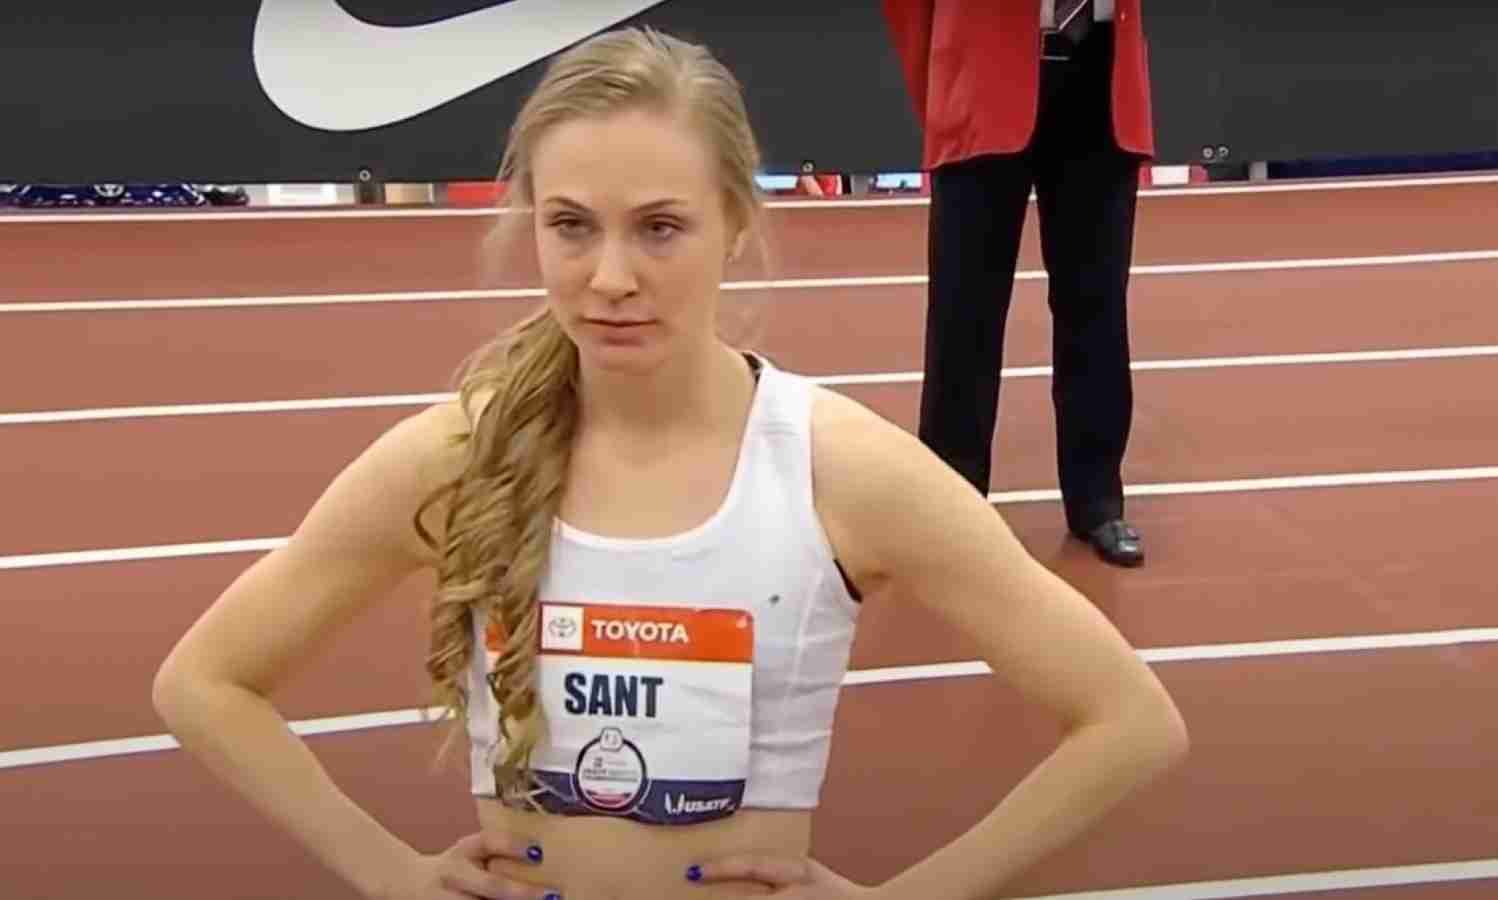 Marybeth-Sant-Price-of-USA-in-the-60m